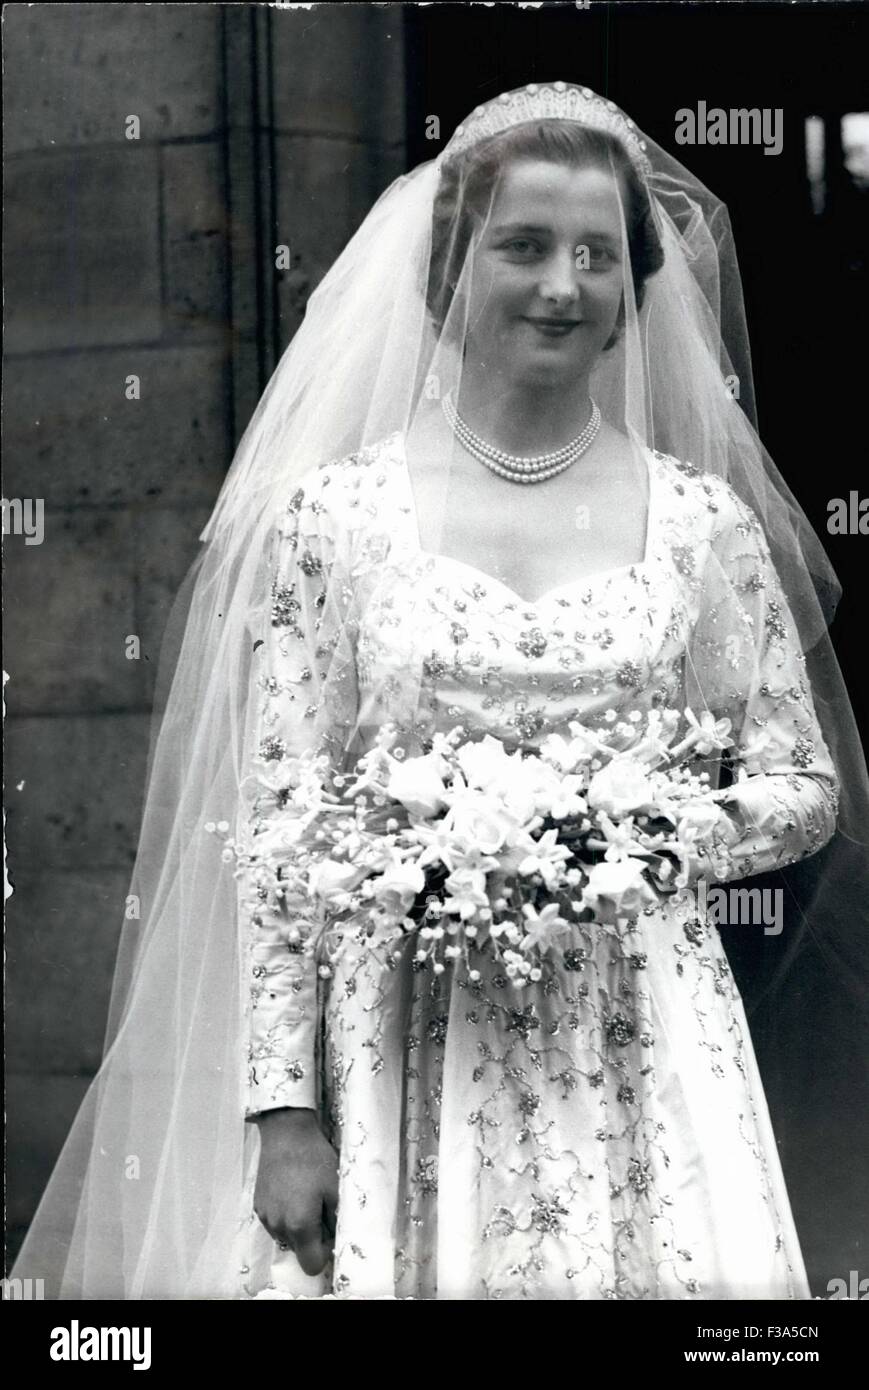 Dec. 29, 1958 - Lady Diana's Mother; Countess Spenser nee Frances Roche, daughter of Lord and Lady Fermoy, seen at her wedding to Viscount Althorn, now Earl Spencer at Westminster Abbey in 1954. © Keystone Pictures USA/ZUMAPRESS.com/Alamy Live News Stock Photo